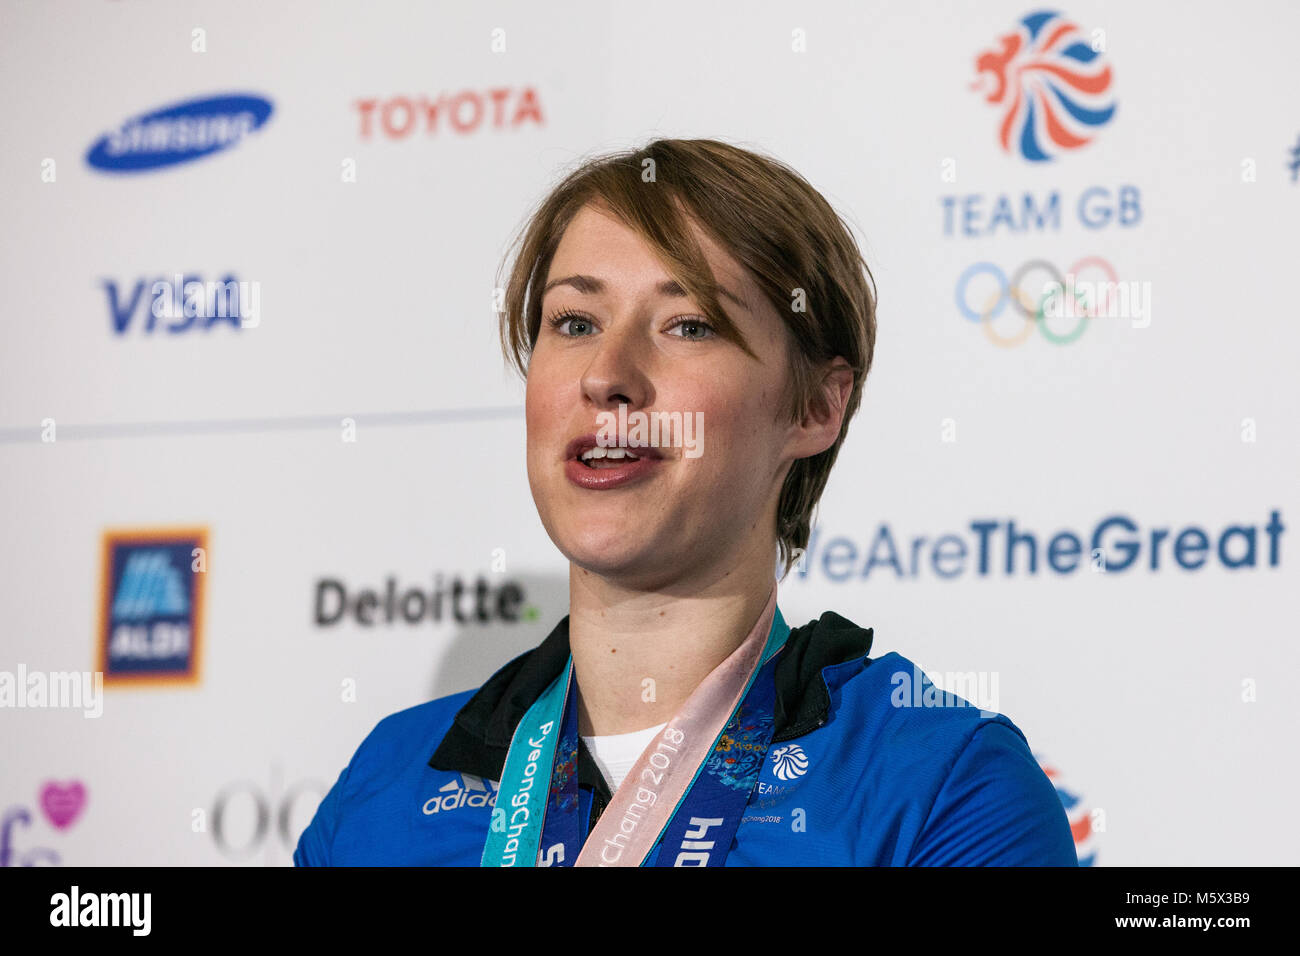 London, UK. 26th February, 2018. Gold medal winner Lizzy Yarnold addresses a press conference following the welcome of Team GB from the Pyeongchang 2018 Olympic Winter Games at Heathrow Airport. Credit: Mark Kerrison/Alamy Live News Stock Photo